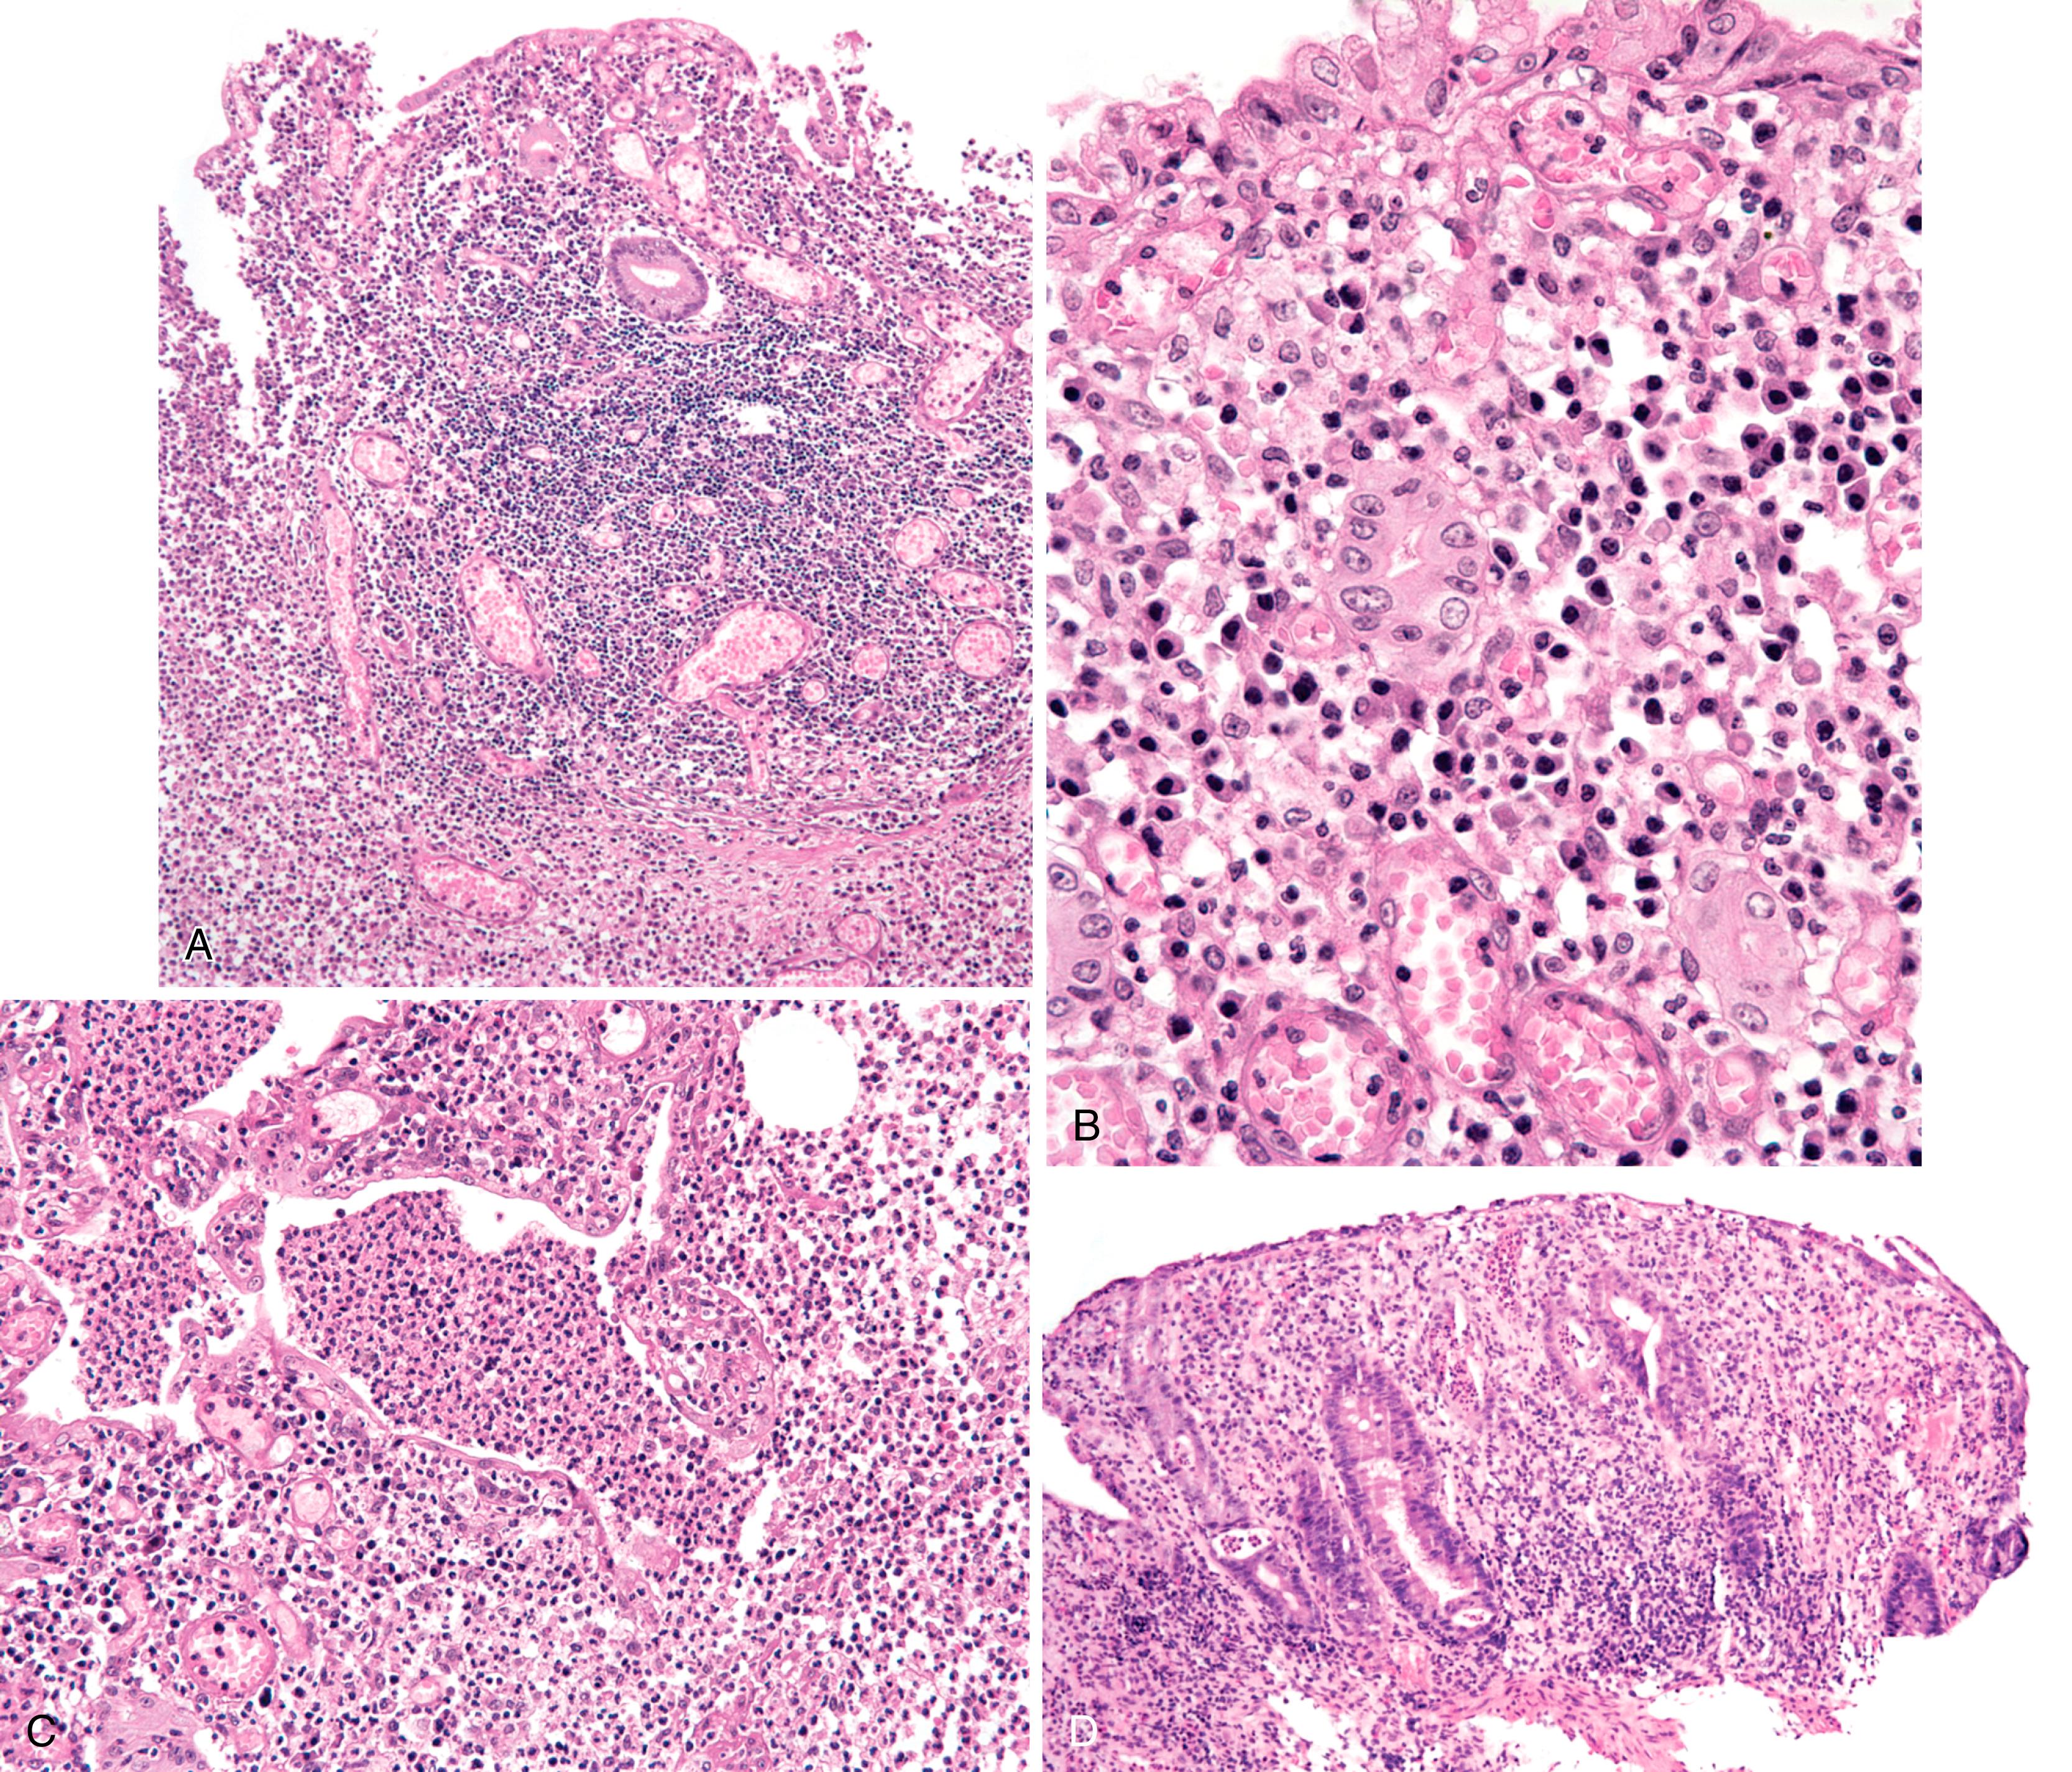 FIGURE 4.15, A, The typical histological lesion of typhoid fever is ulceration overlying a lymphoid aggregate or Peyer’s patch. B, The typical inflammatory infiltrate is predominantly mononuclear, featuring plasma cells, lymphocytes, and histiocytes, with inconspicuous neutrophils. C, Architectural distortion can mimic that of chronic idiopathic inflammatory bowel disease. D, Nontyphoid Salmonella infection often shows features of acute infectious-type colitis but can also exhibit mild architectural disarray and gland loss.